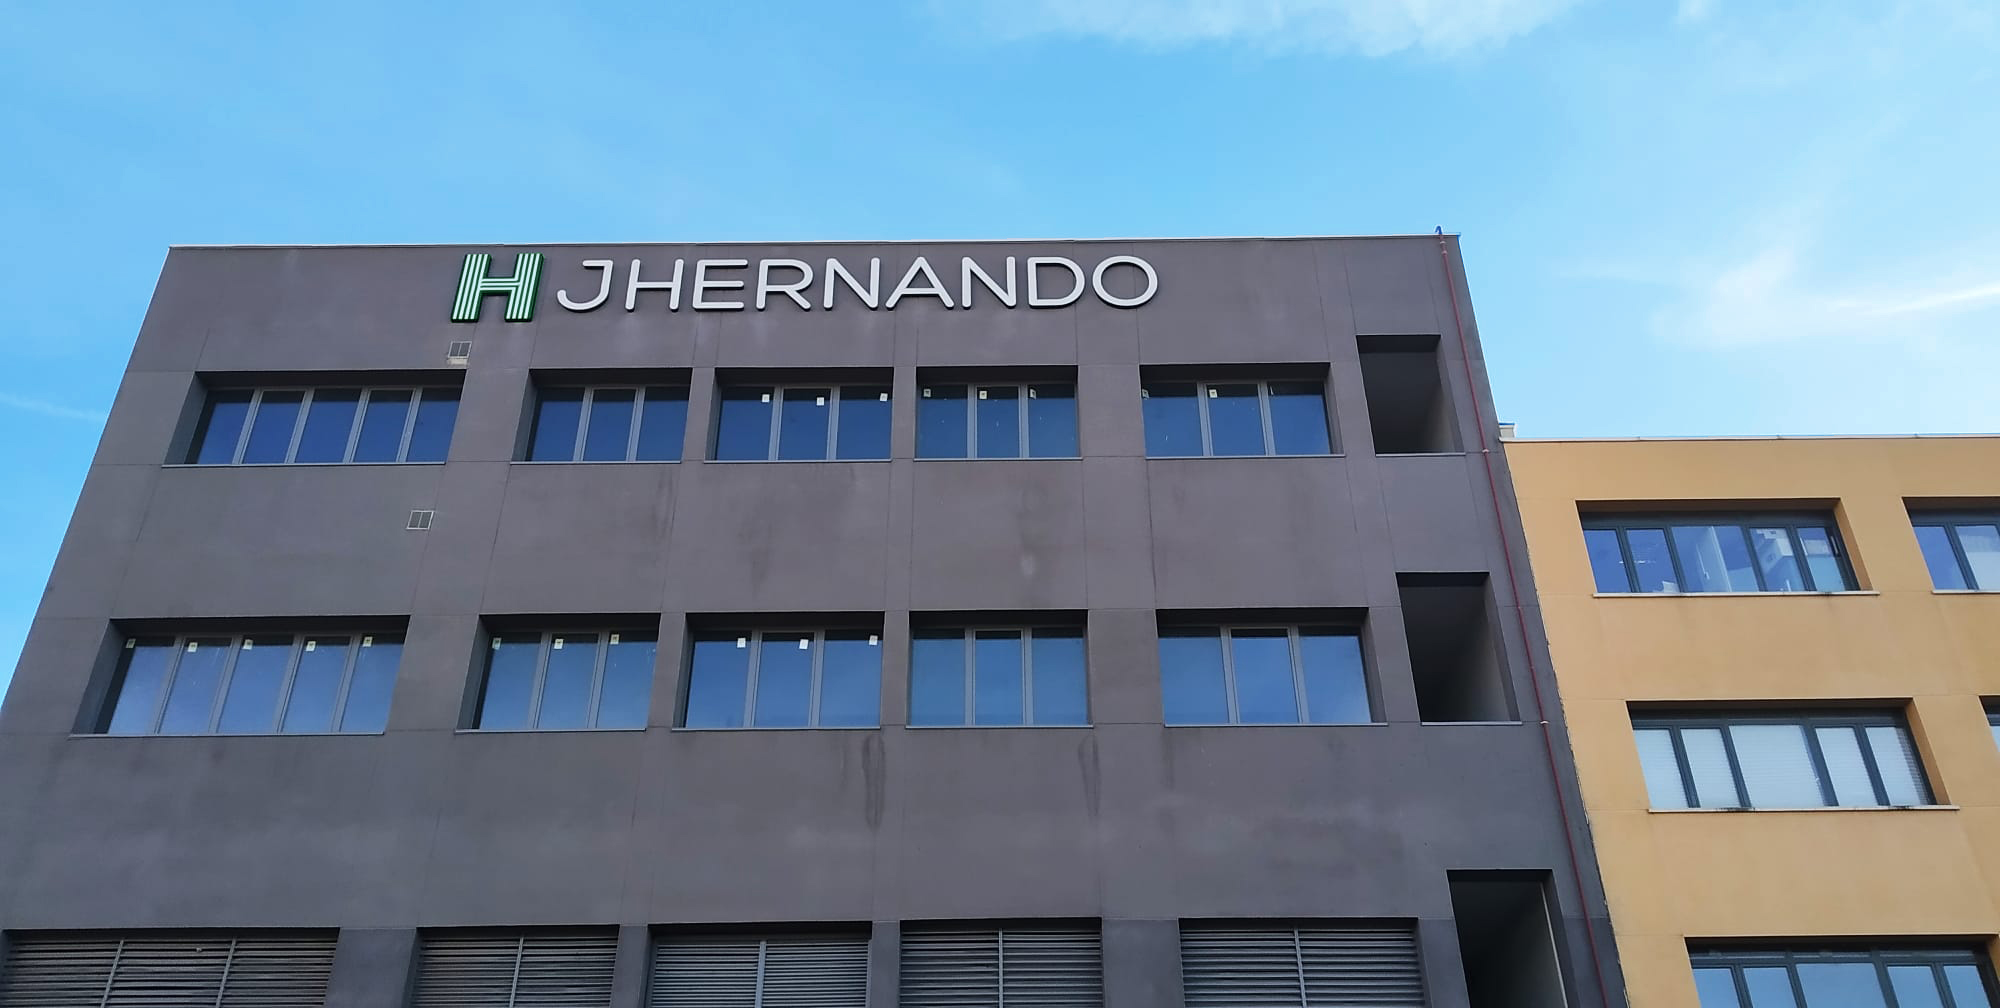 JHernando will open its second factory in Madrid